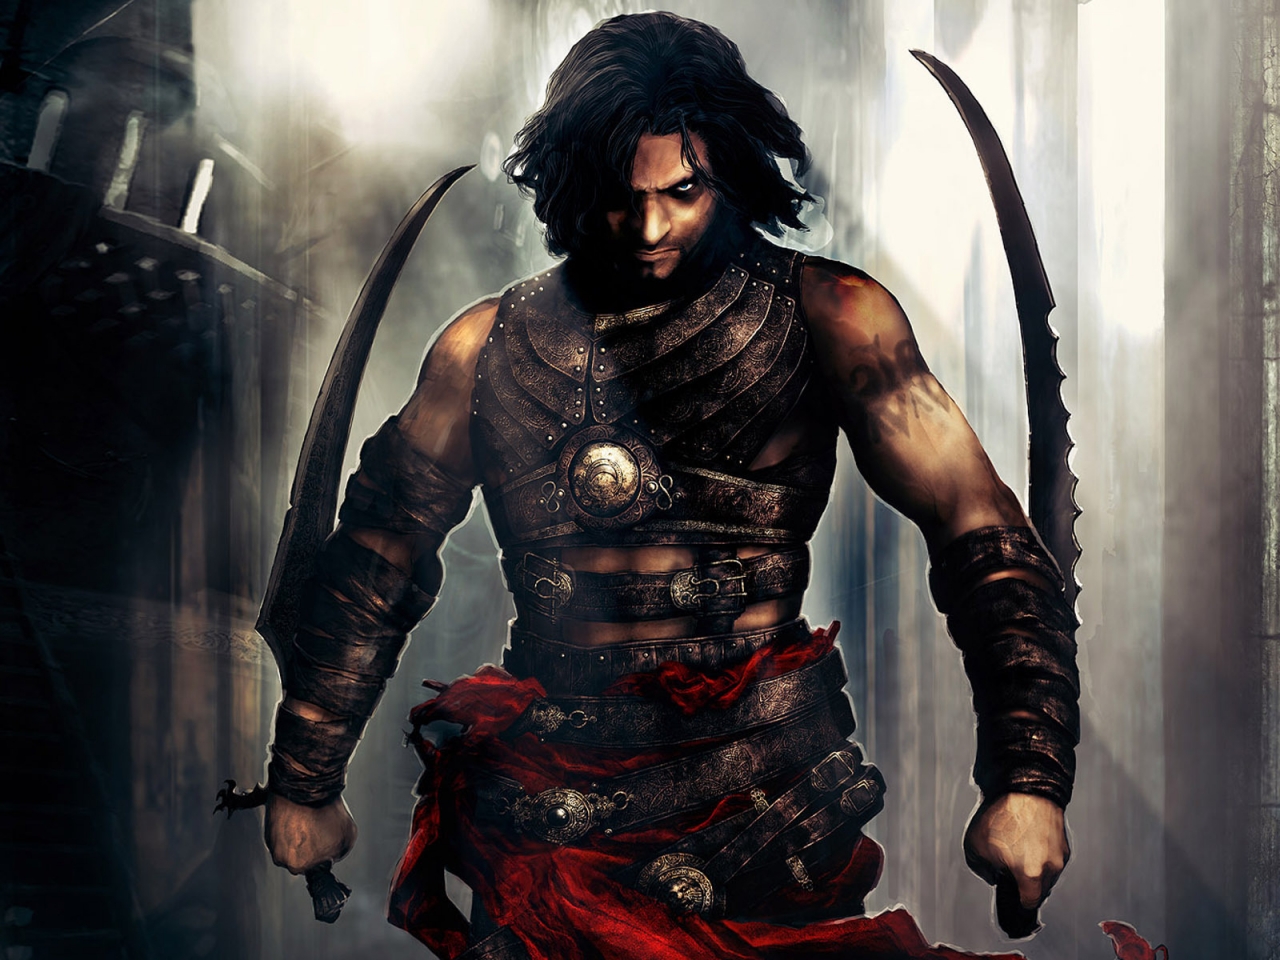 Prince of Persia Scene for 1280 x 960 resolution